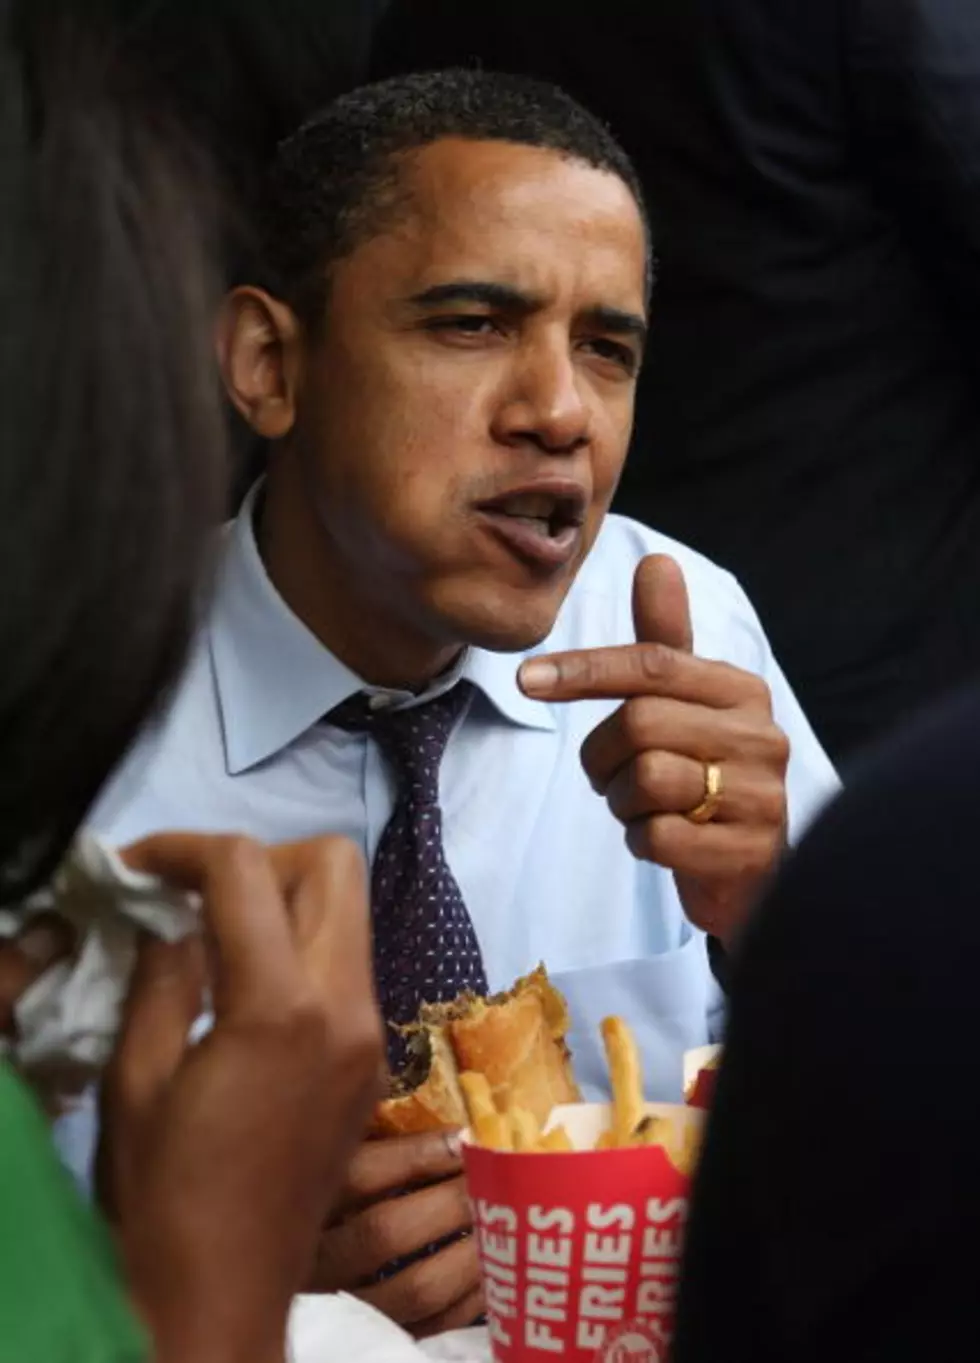 Food Plays An Important Role In Obama Re-Election Campaign